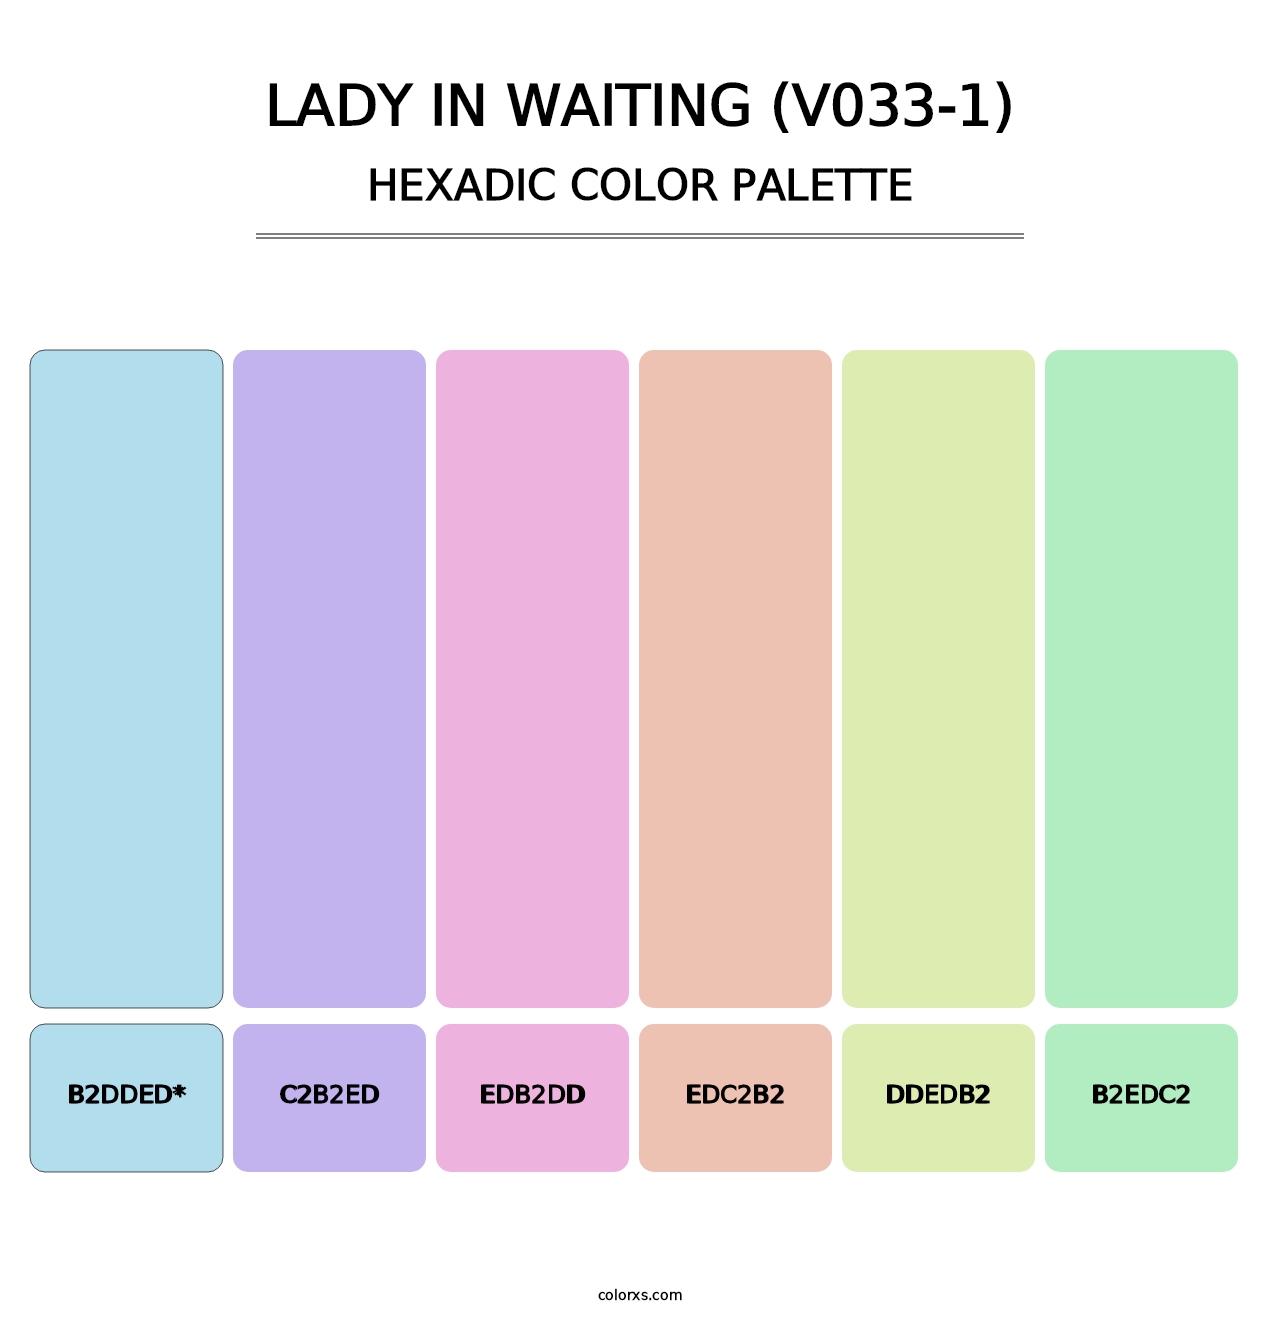 Lady in Waiting (V033-1) - Hexadic Color Palette